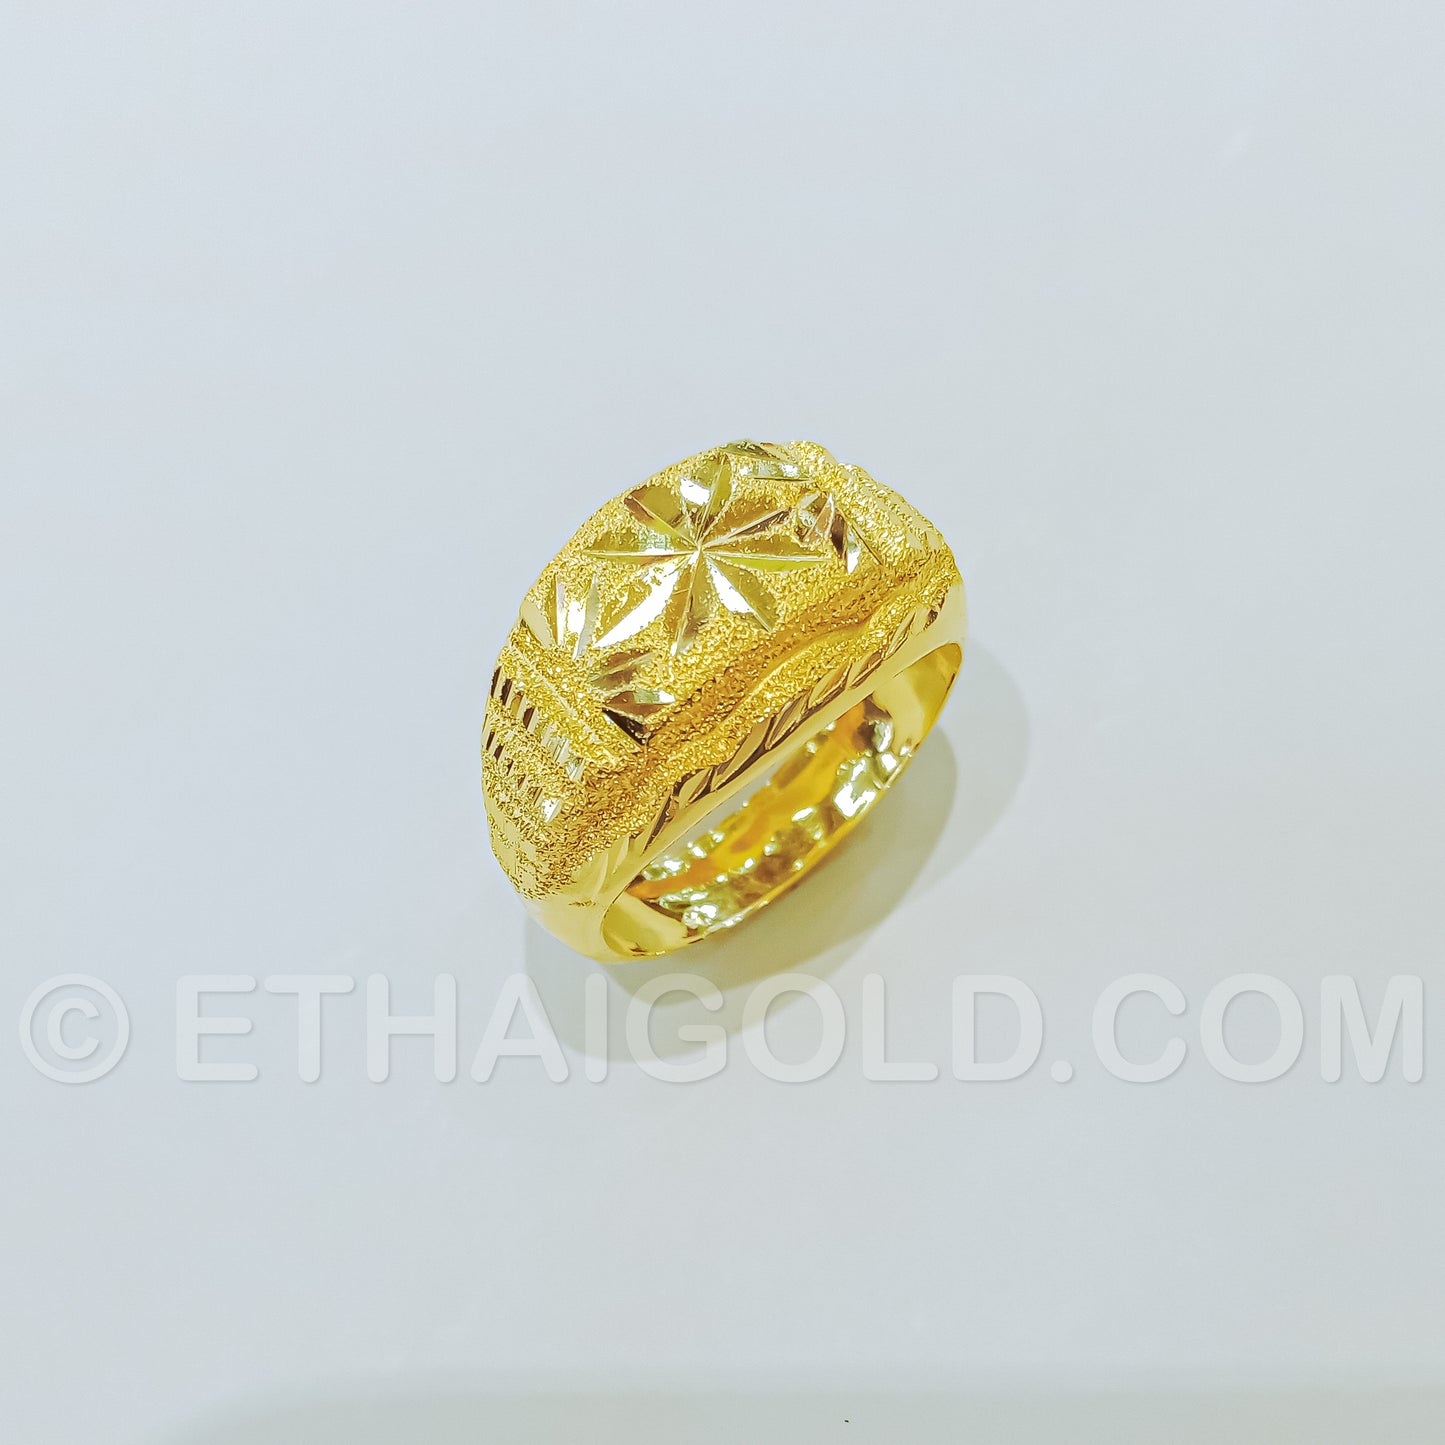 1/4 BAHT POLISHED SPARKLING DIAMOND-CUT HOLLOW CLASSIC RING IN 23K GOLD (ID: R0901S)